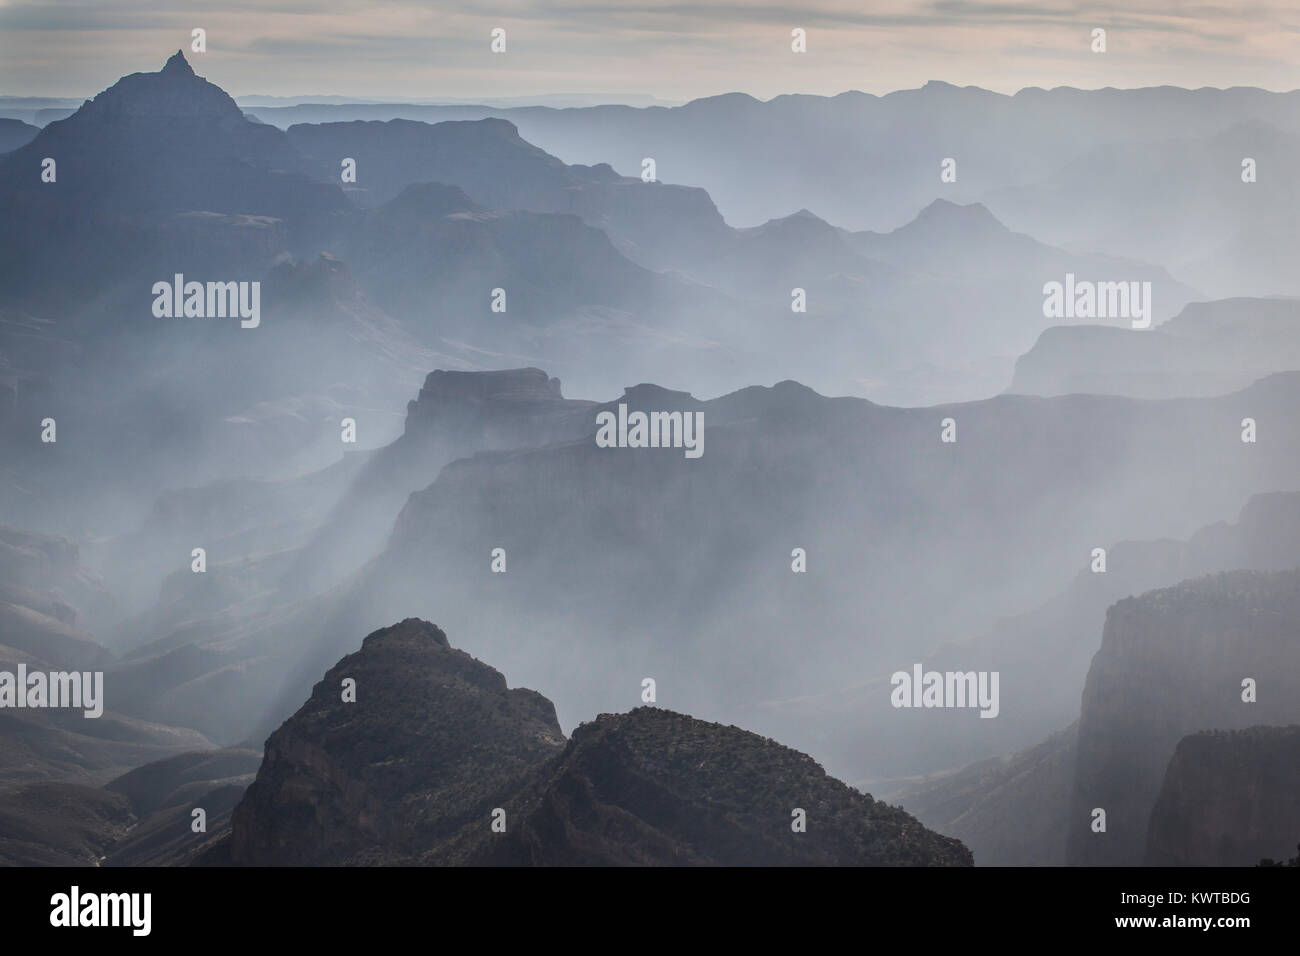 Haze of smoke in the canyon from nearby forest fires. Grand Canyon National Park, Arizona, USA. Stock Photo